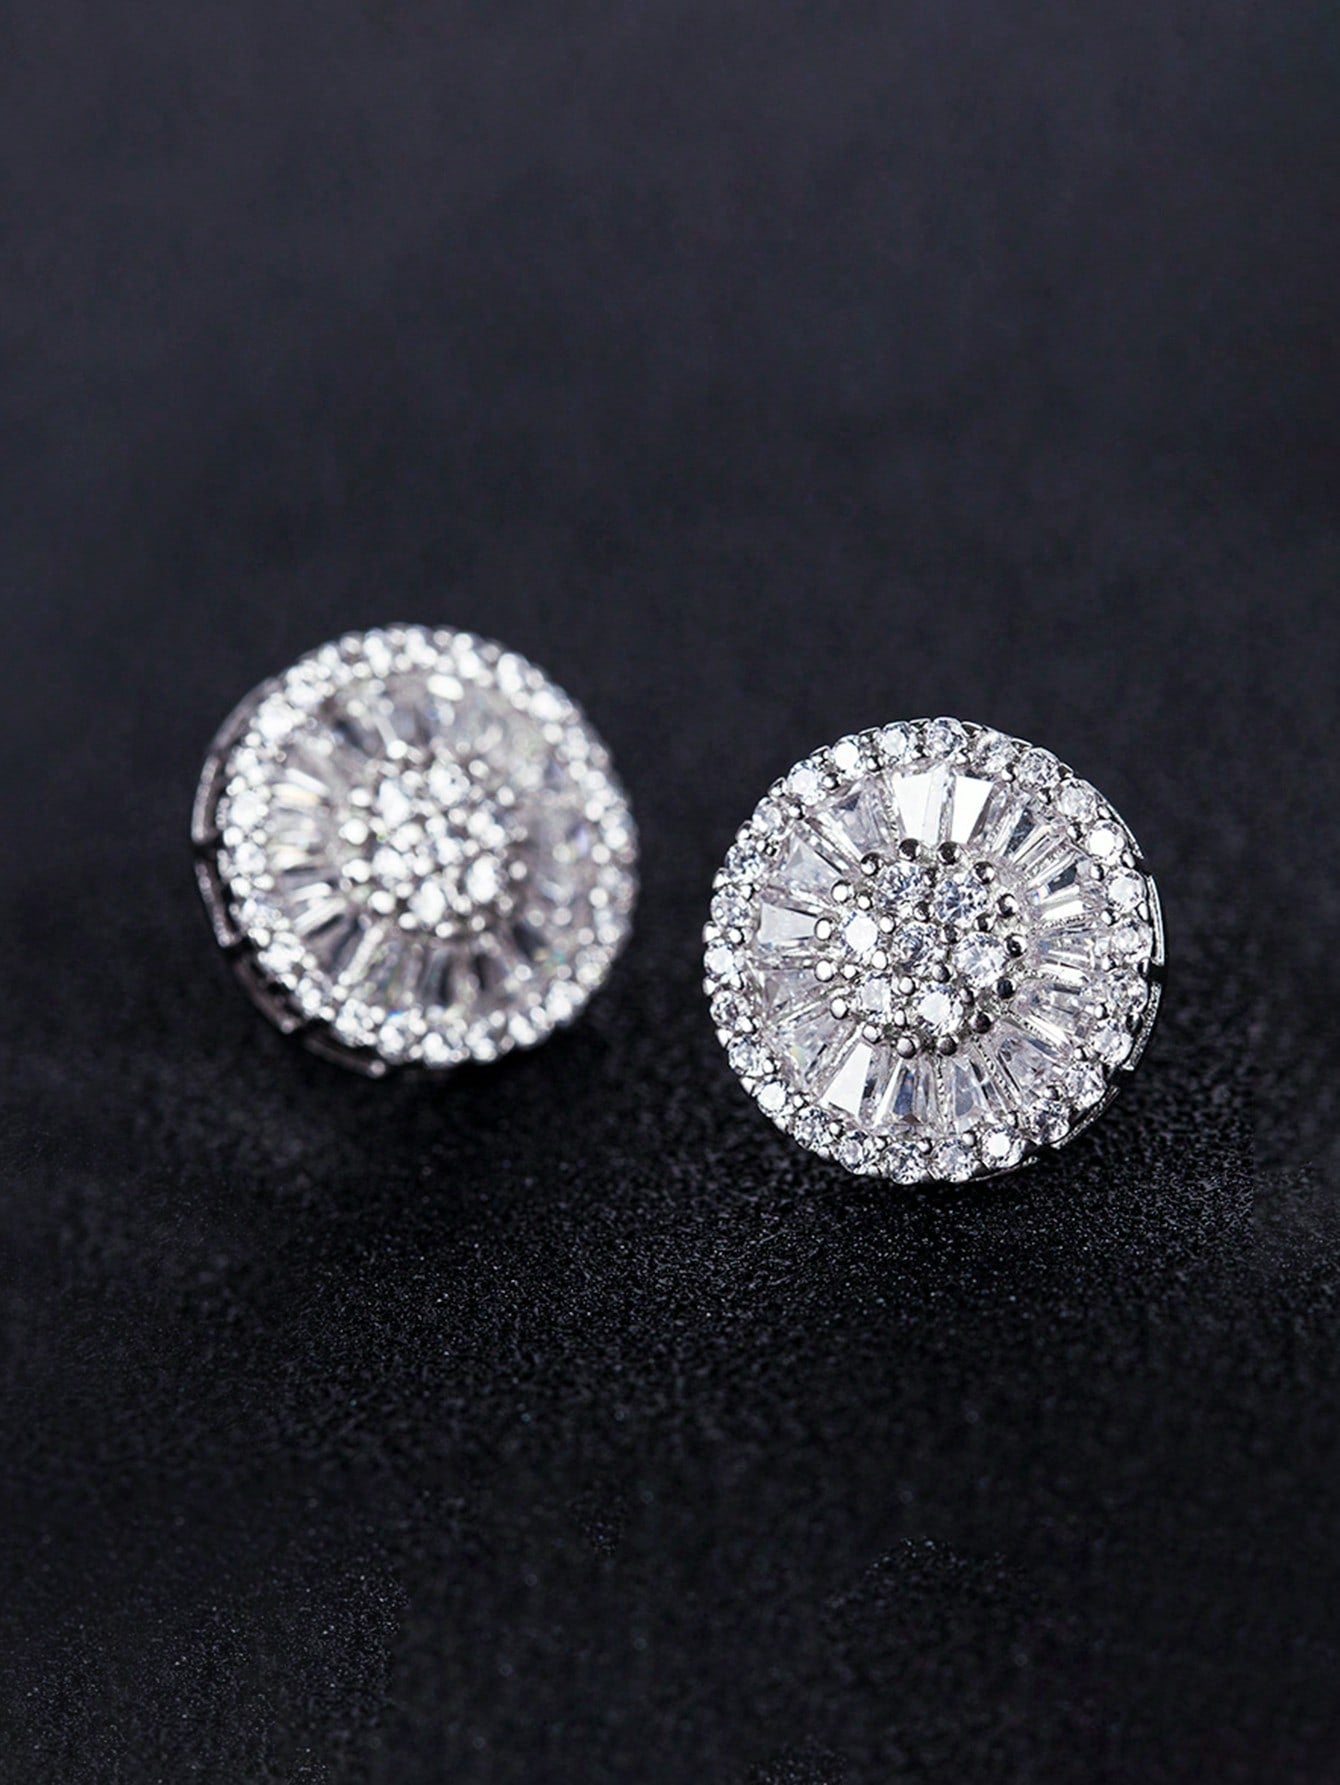 1pair Glamorous Cubic Zirconia Decor Stud Earrings For Women For Daily Decoration